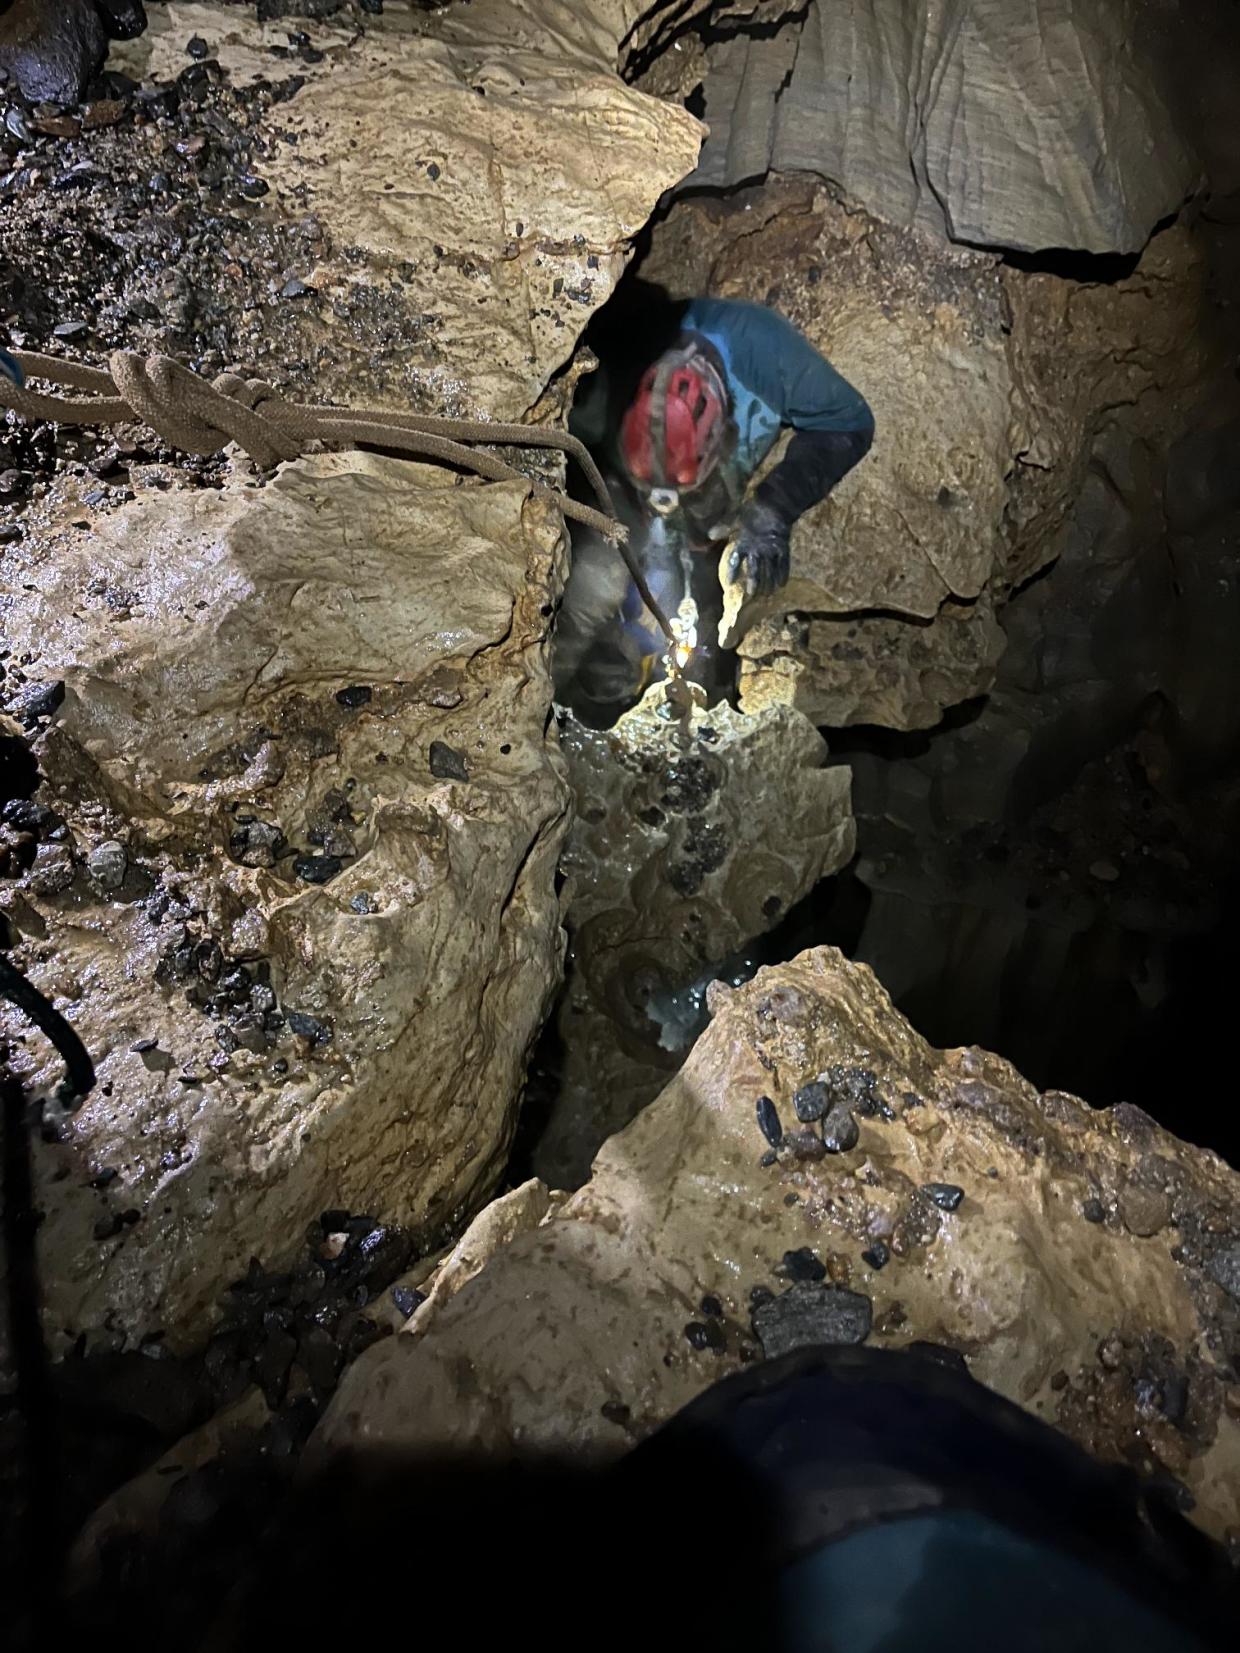 MassWildlife staff member repelling into cave